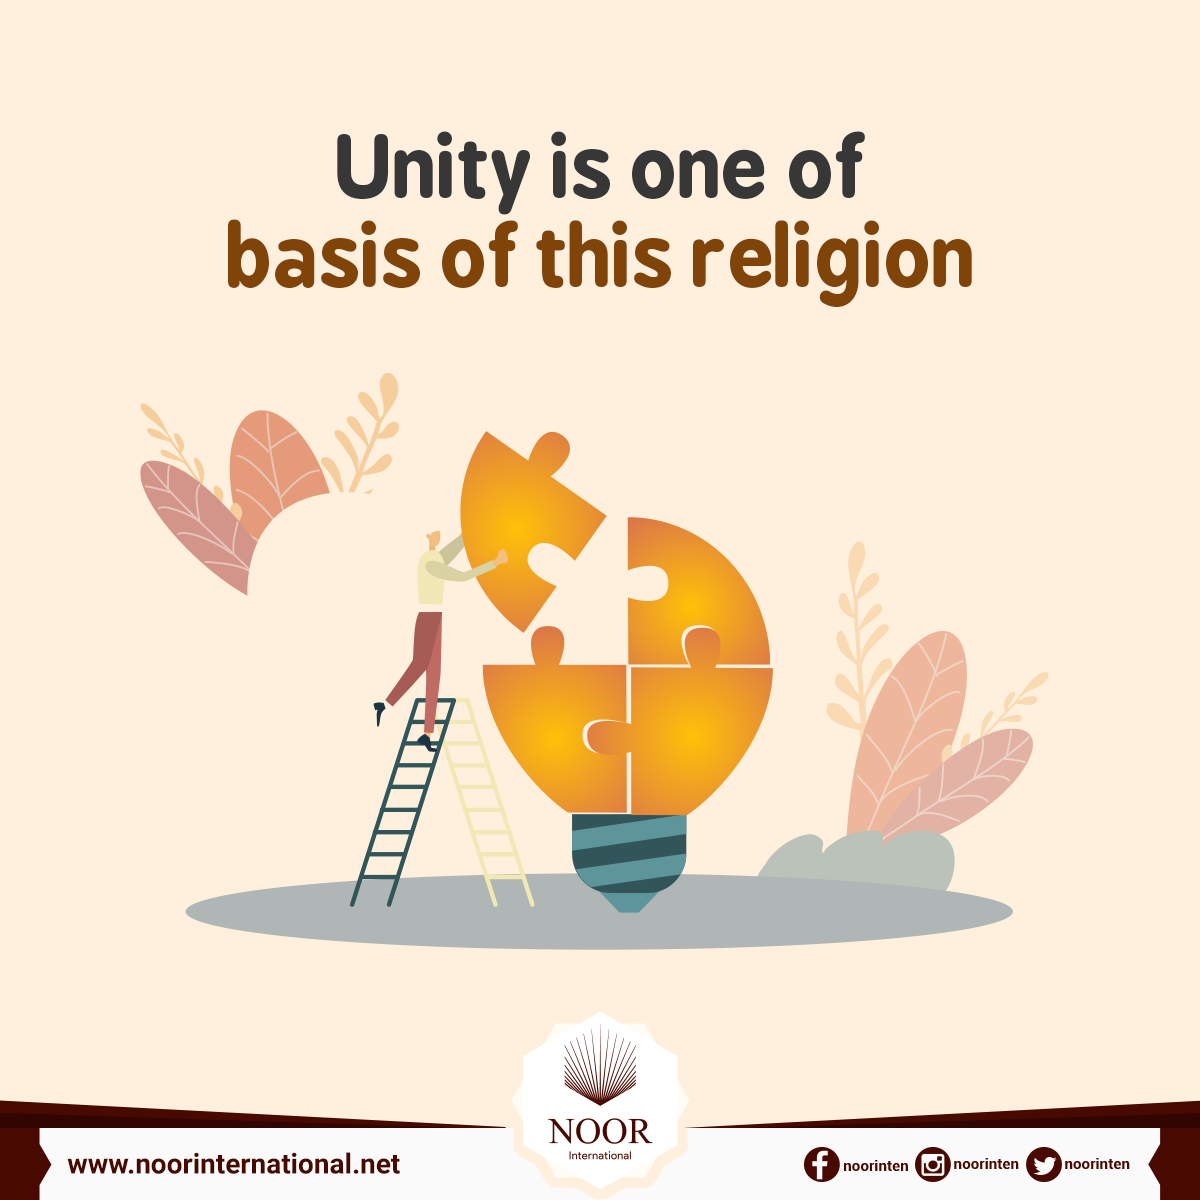 Unity is one of basis of this religion